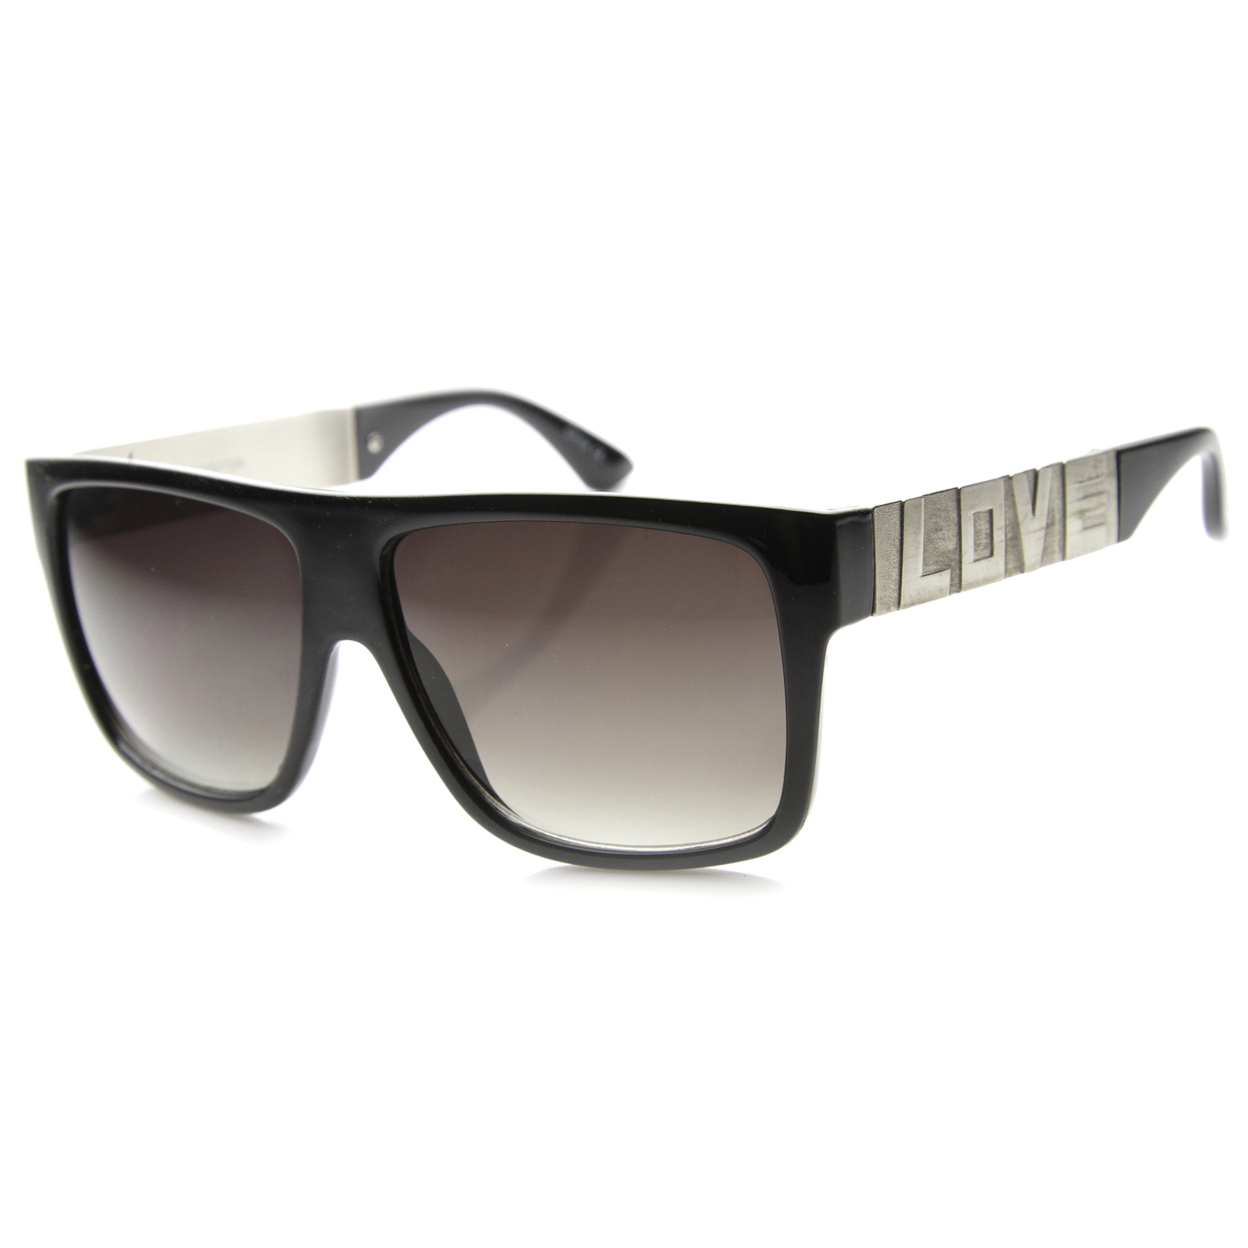 Unisex Square Sunglasses With UV400 Protected Gradient Lens 9850 - Black-Silver / Lavender